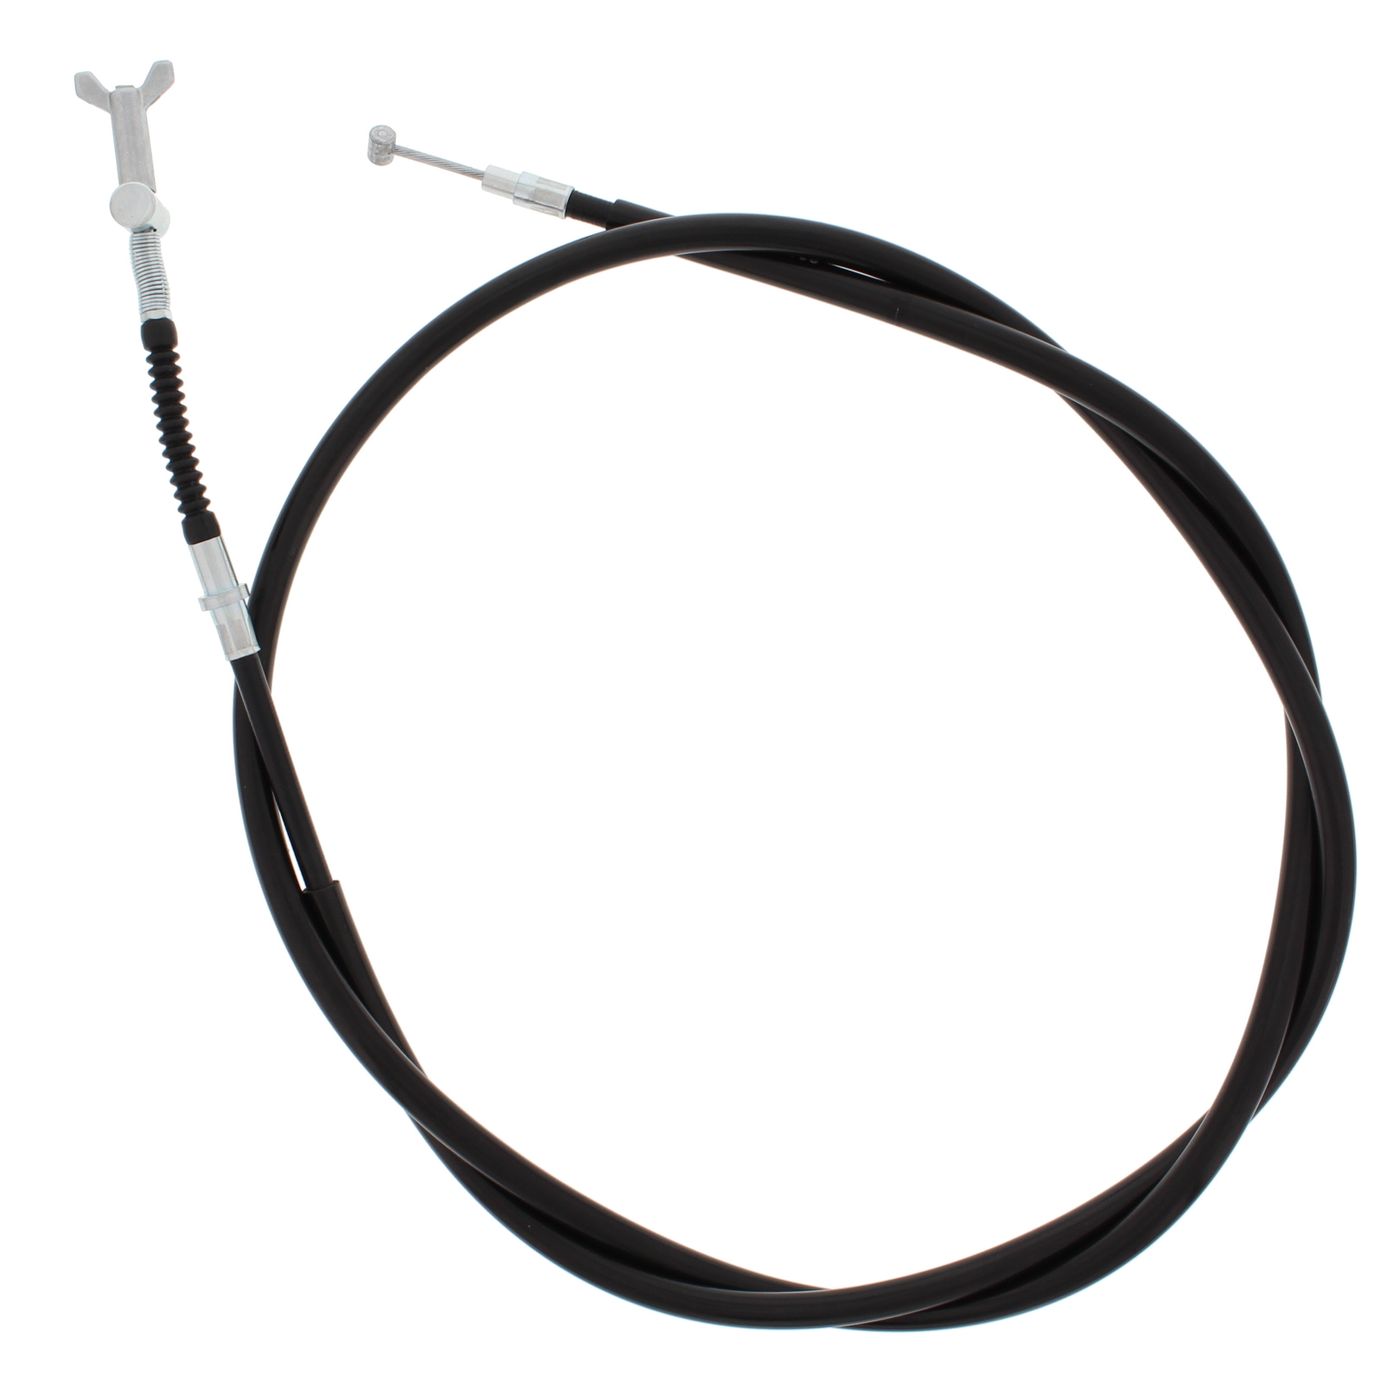 Wrp Brake Cables - WRP454074 image